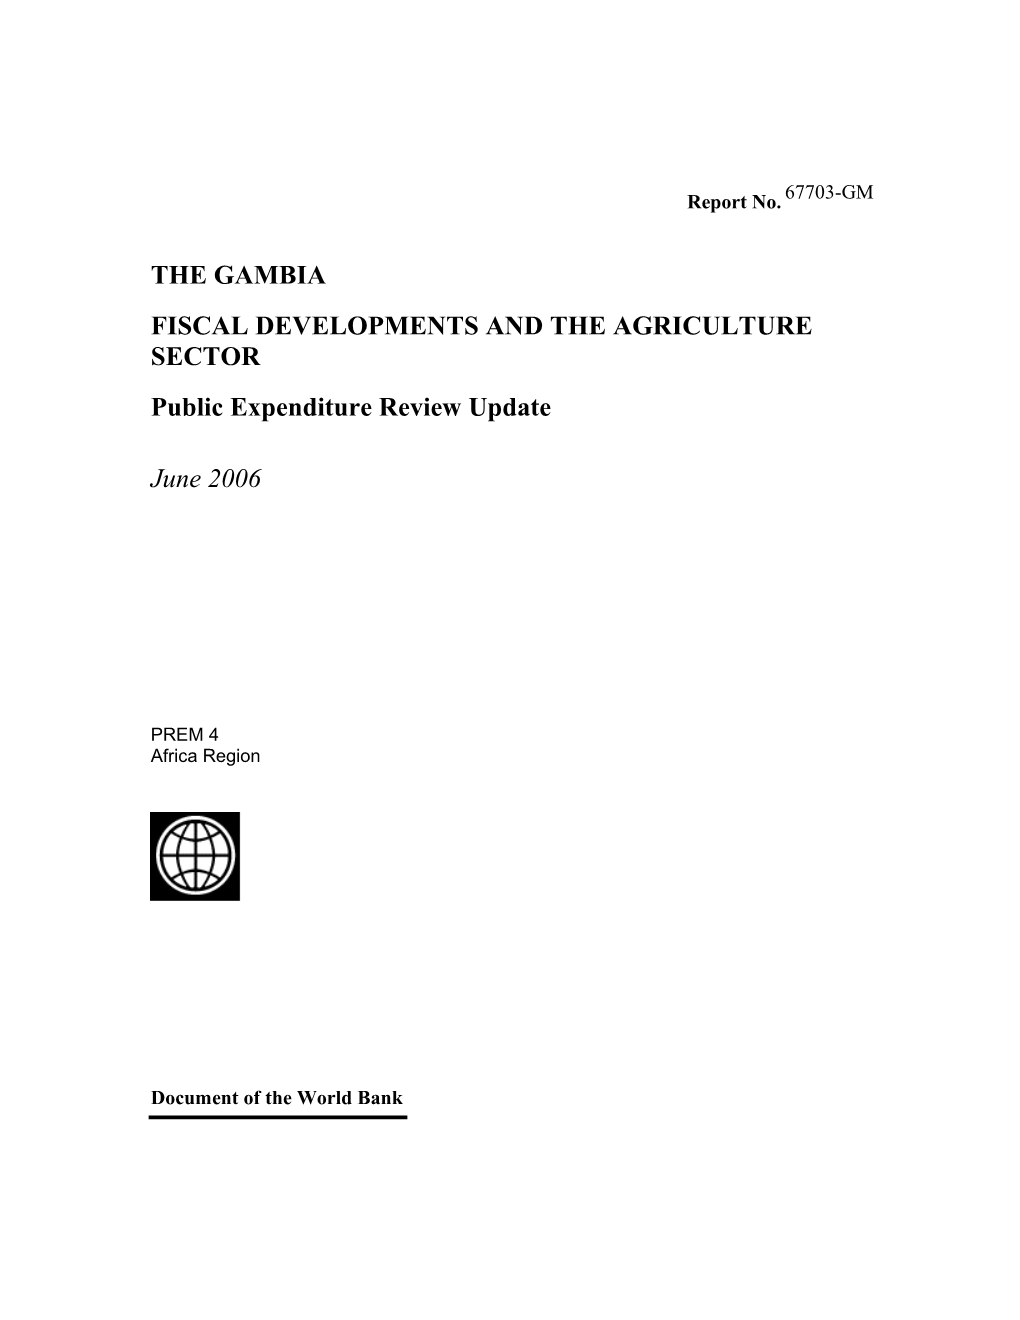 Fiscal Developments and the Agriculture Sector